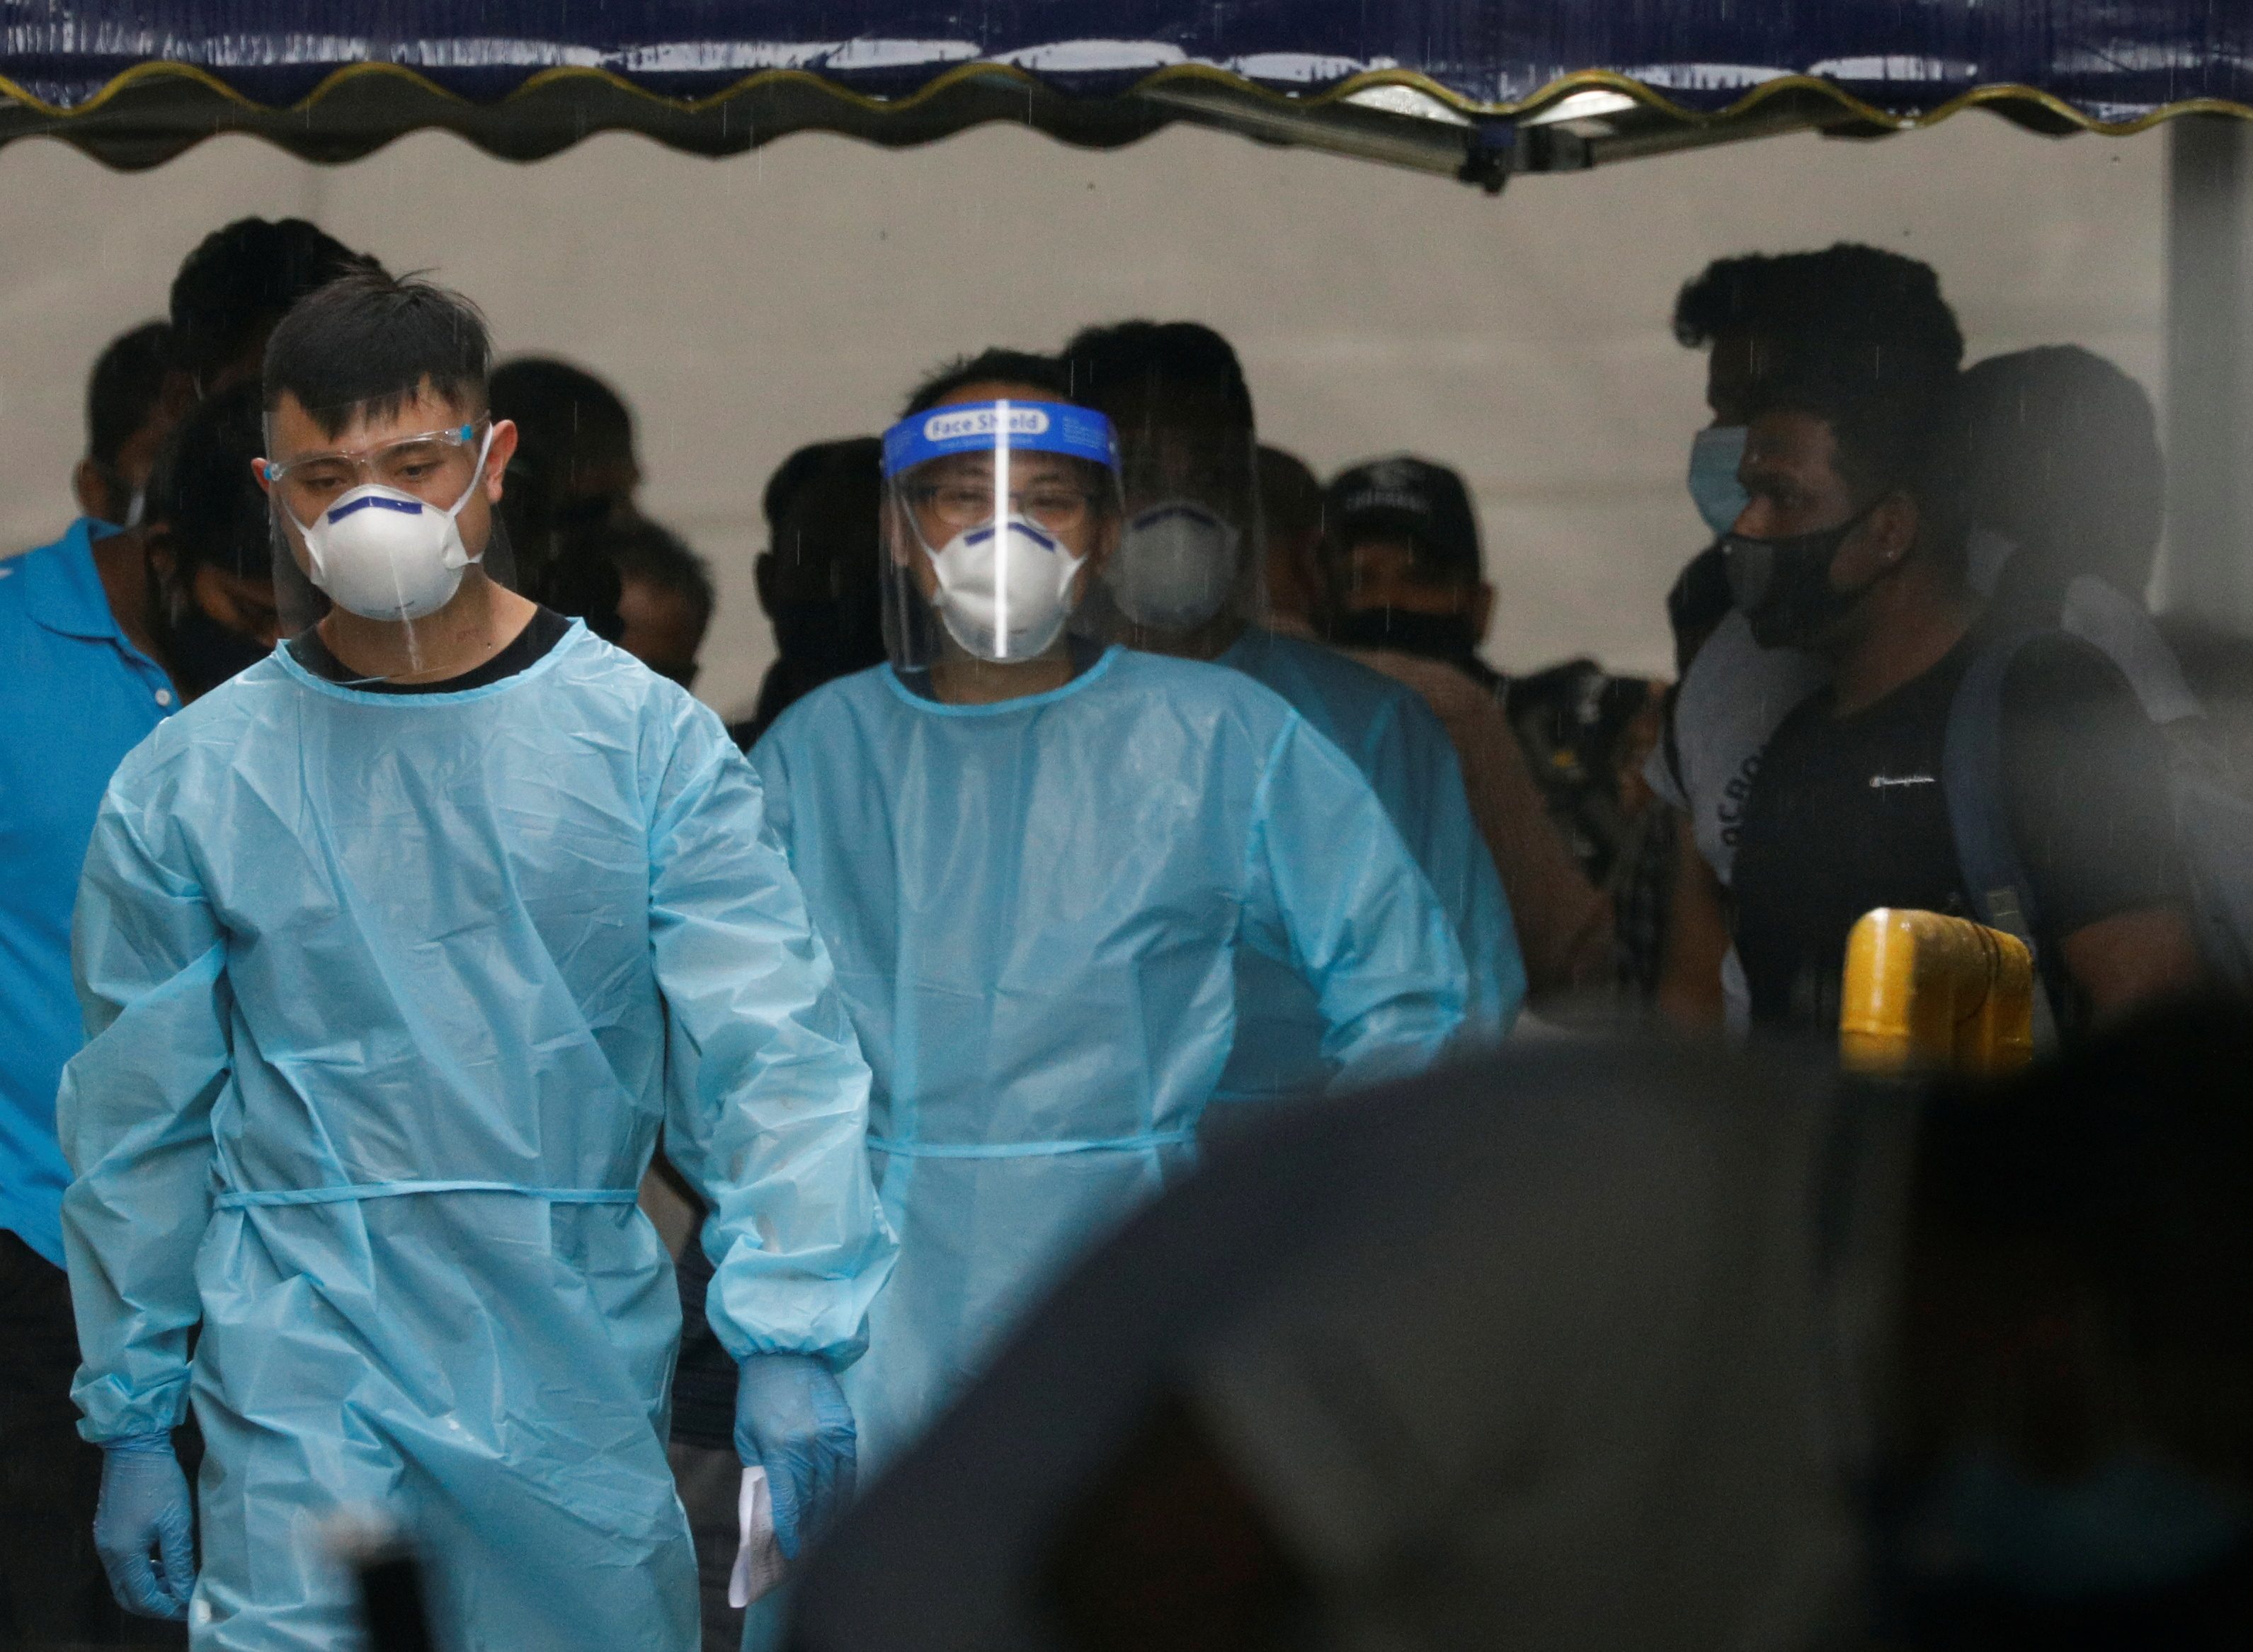 Singapore warns of ‘tougher action’ if infections spread wider